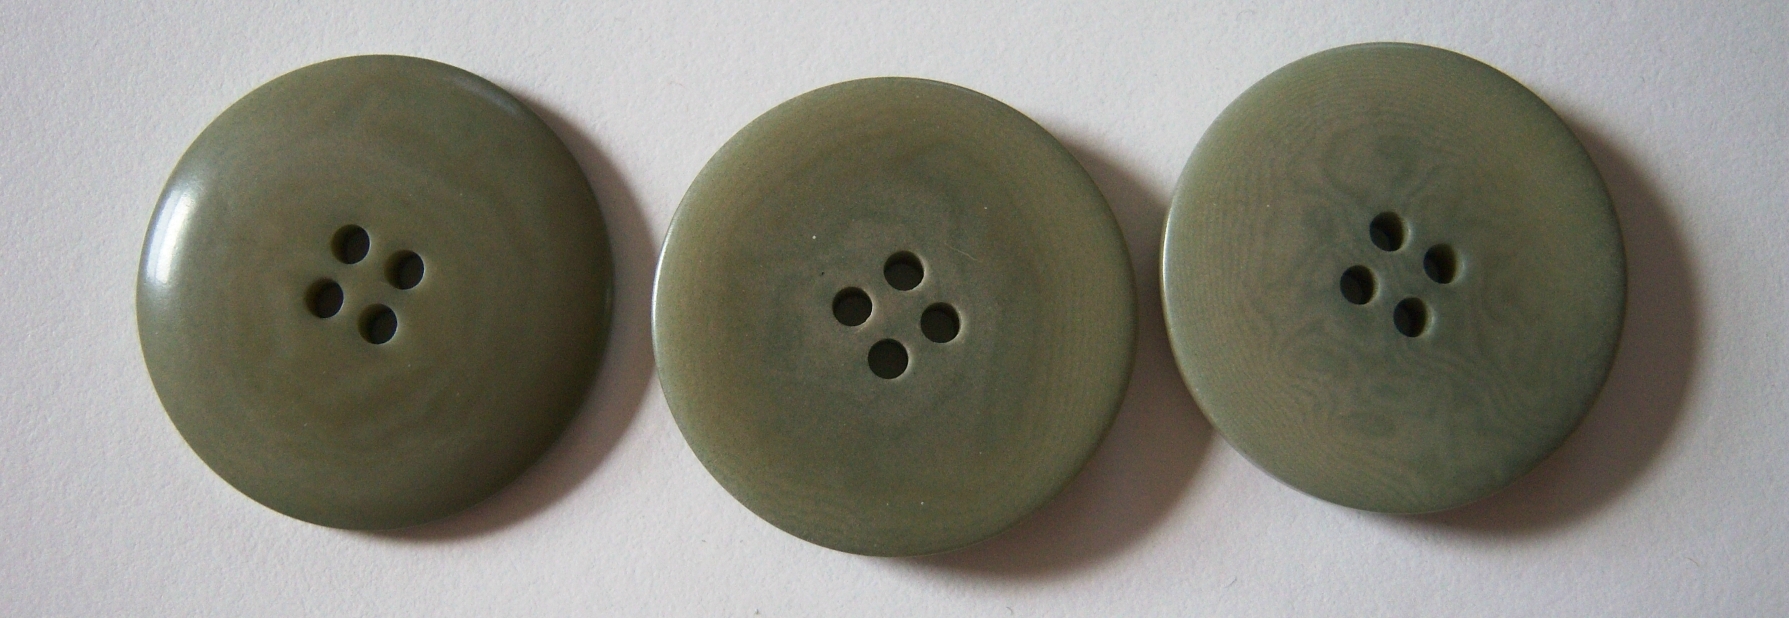 Sage Marbled 1 1/8" Poly 4 Hole Button